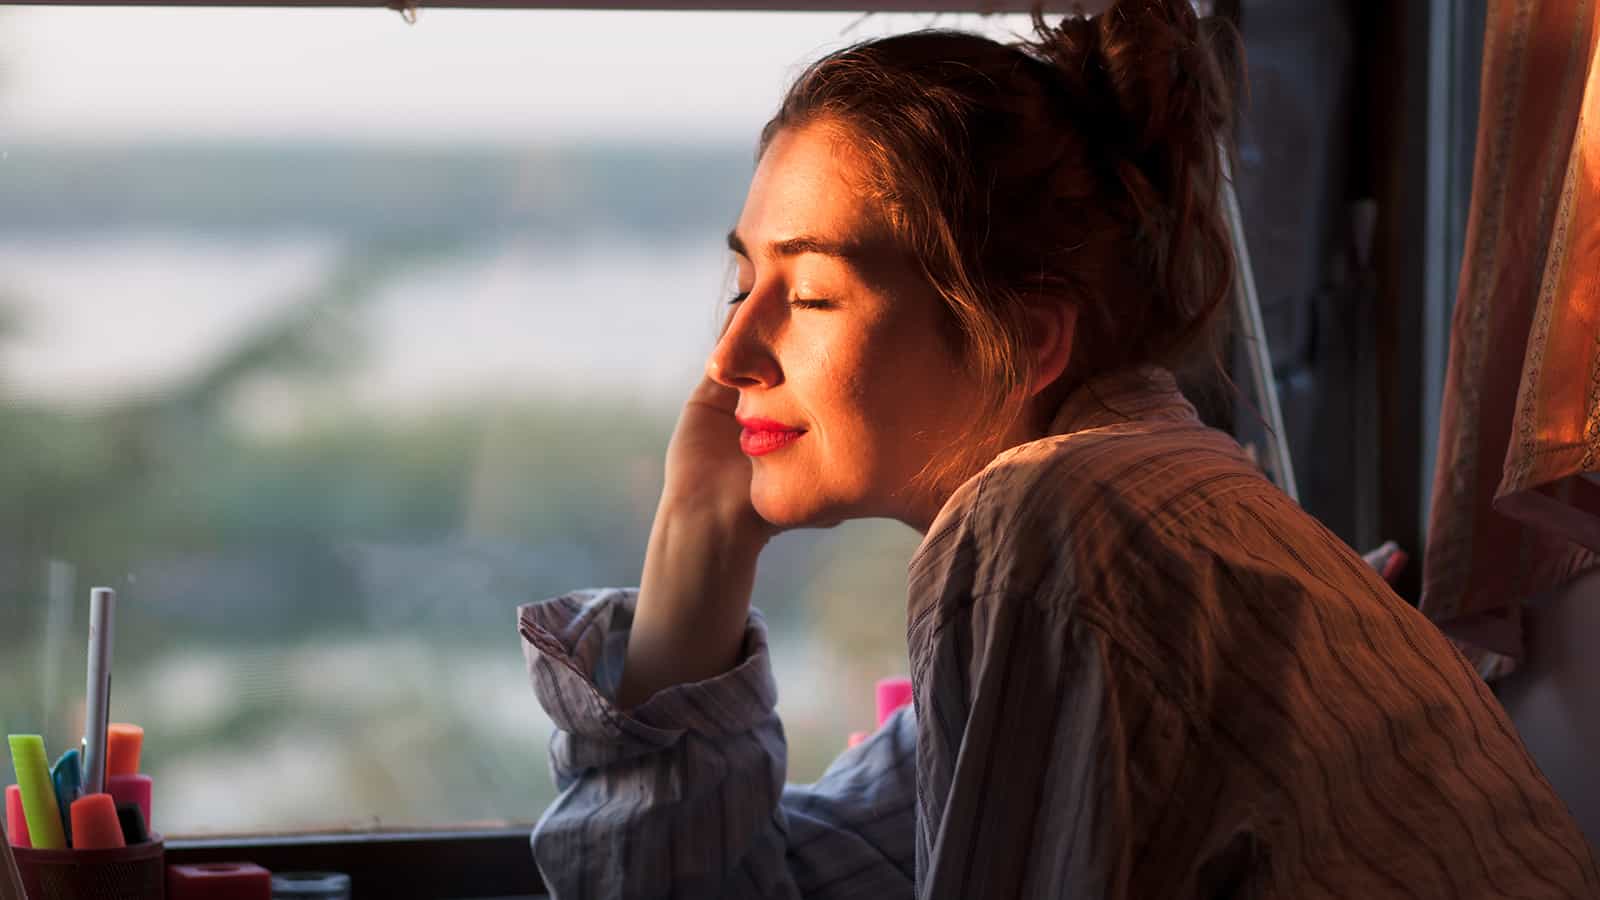 Morning Sunlight Helps You Heal in 4 Surprising Ways, According to Science